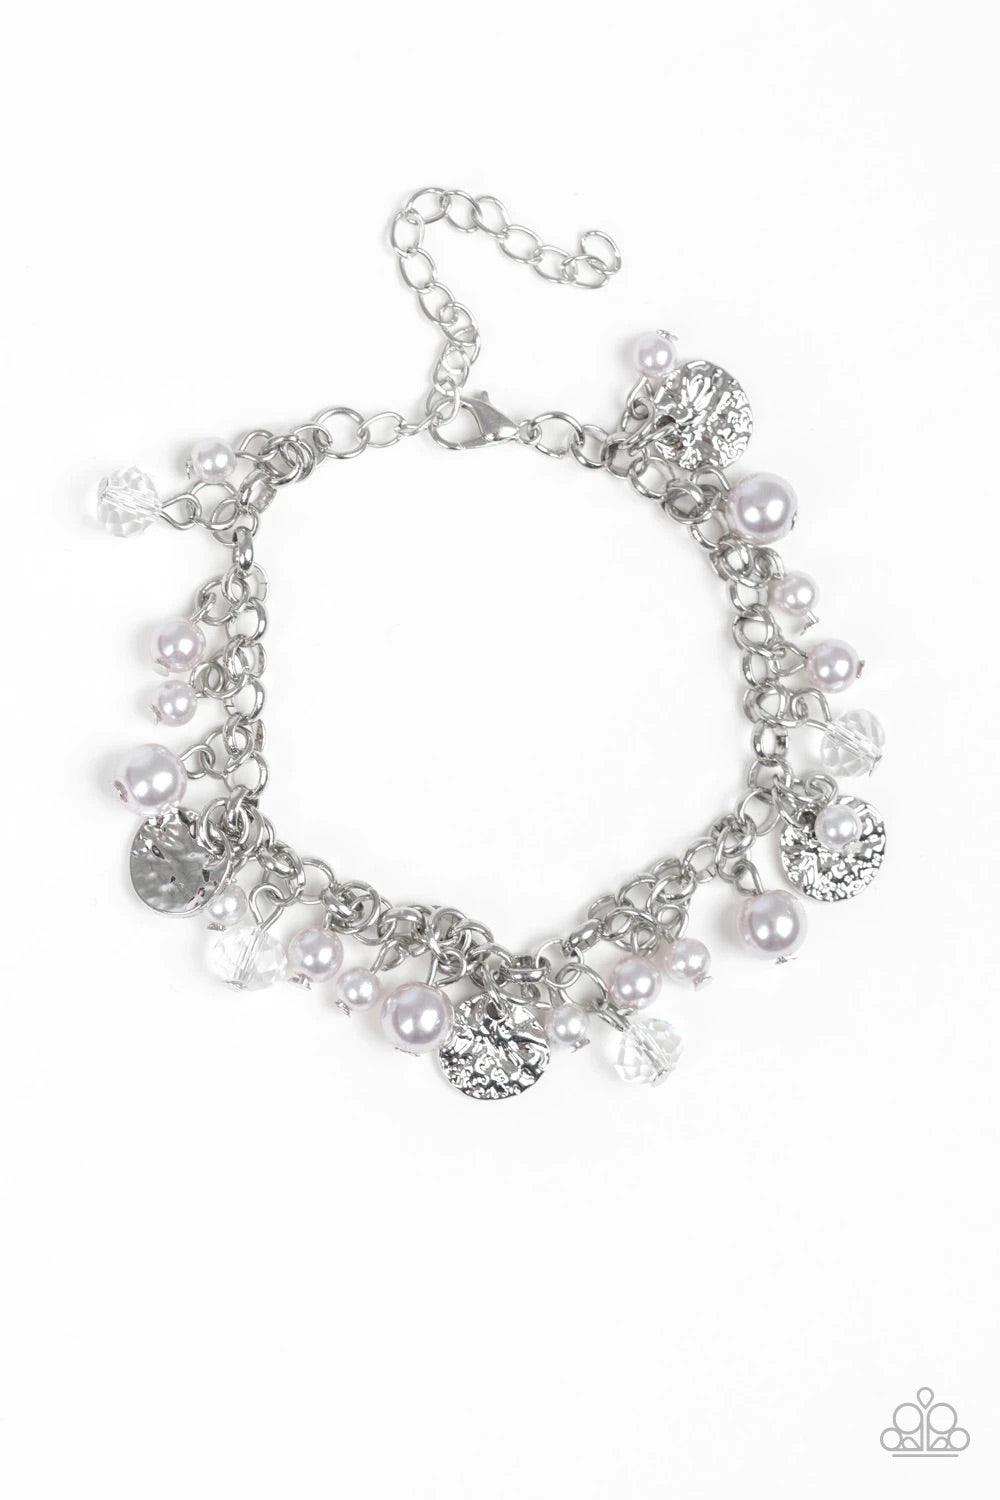 Paparazzi Accessories West Coast Wanderer - Silver Pearly silver beads, smoky crystal-like gems, and hammered silver discs swing from a bold silver chain, creating a refined fringe around the wrist. Features an adjustable clasp closure.Sold as one individ